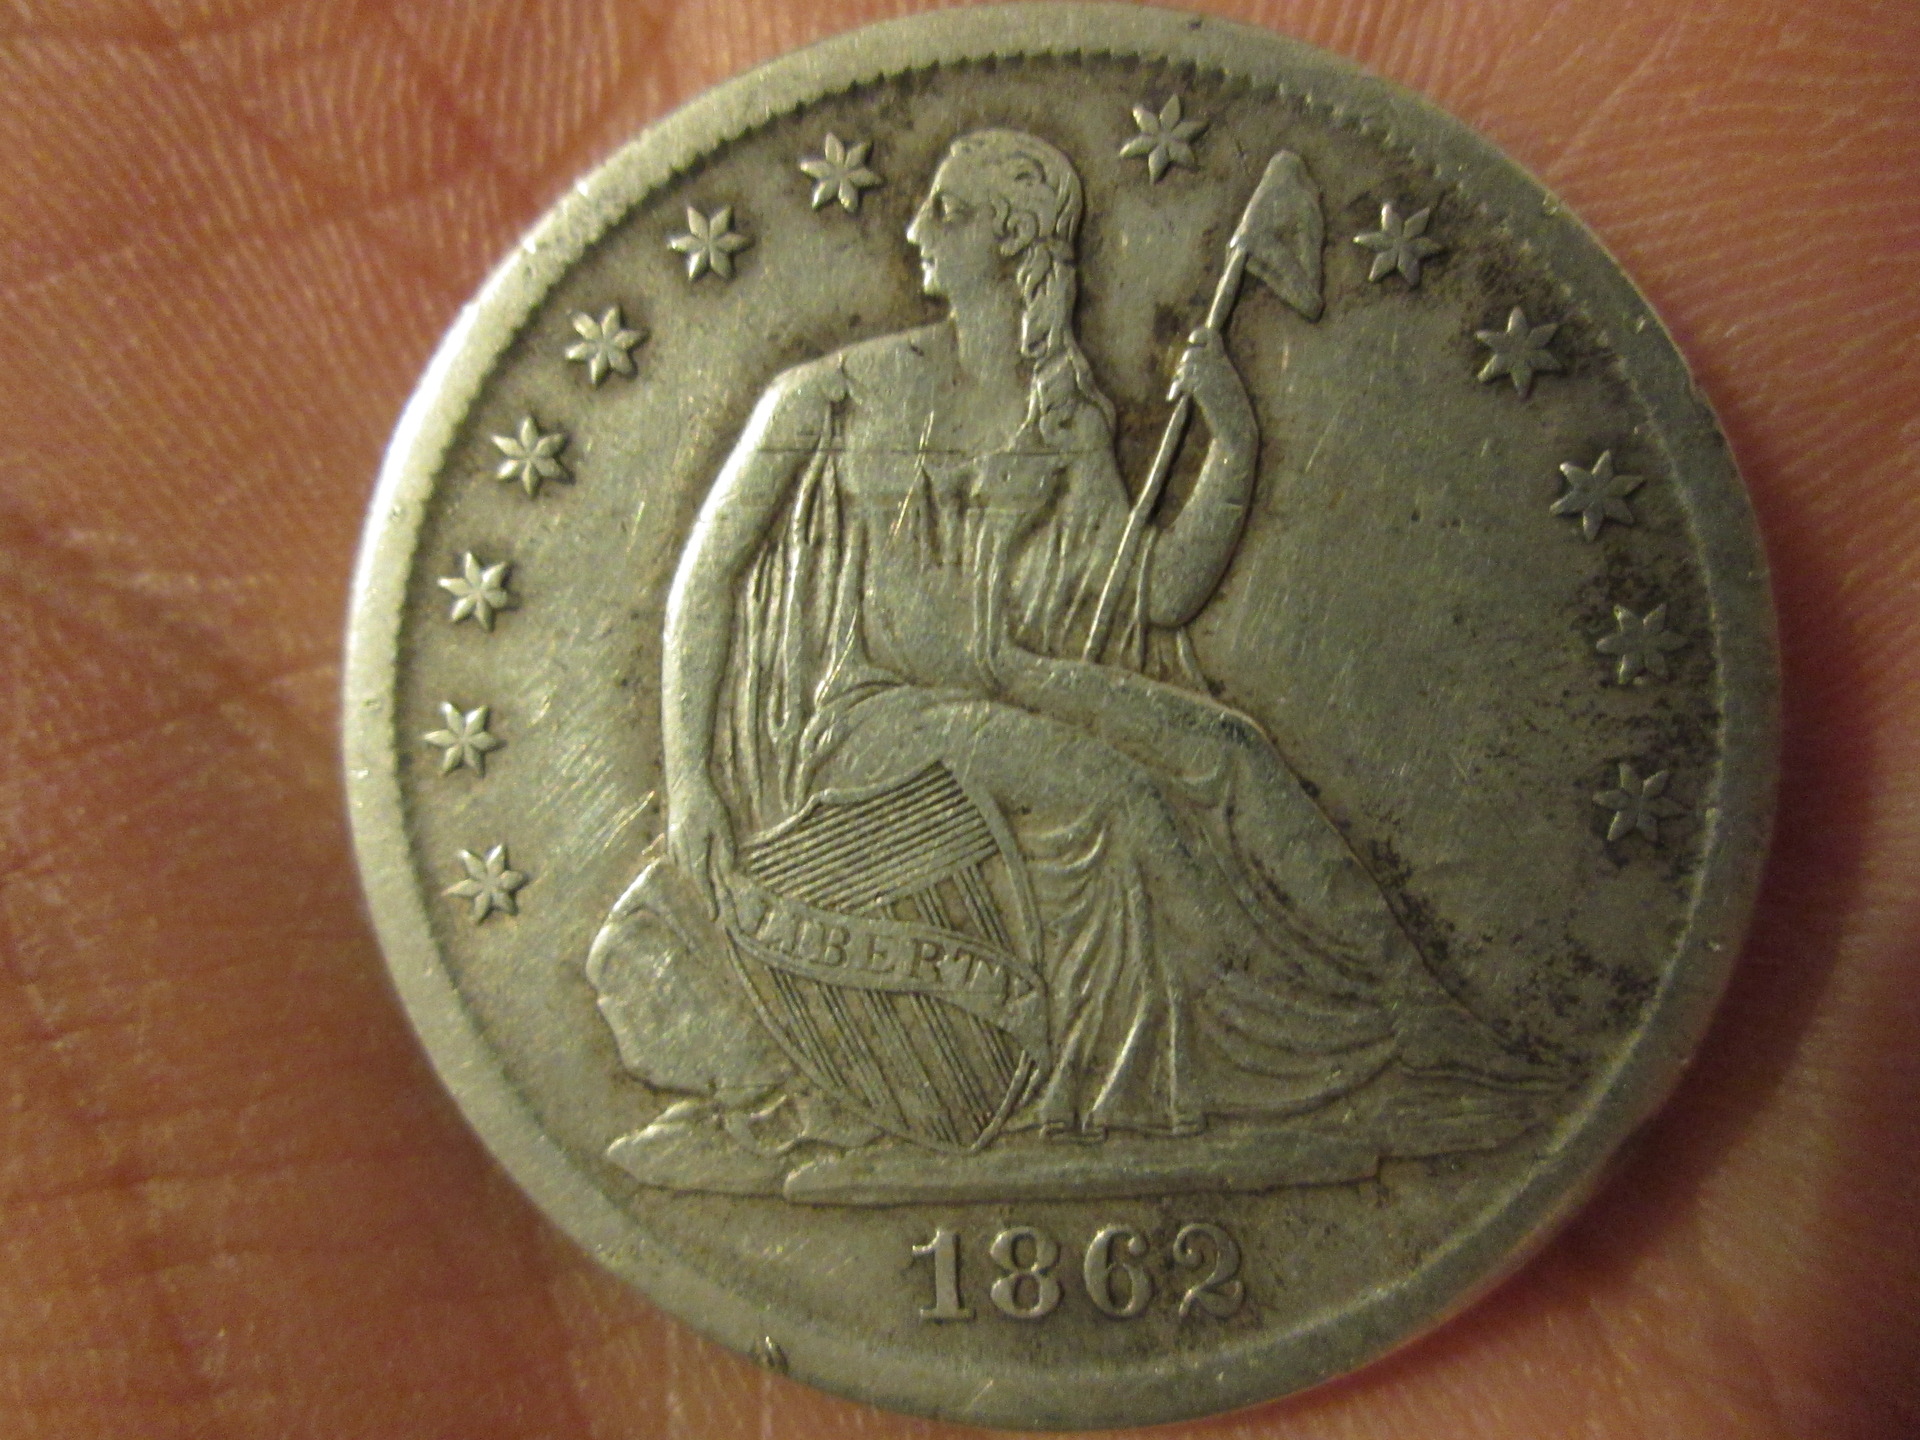 Real or Fake? 1862 S seated half dollar | Coin Talk